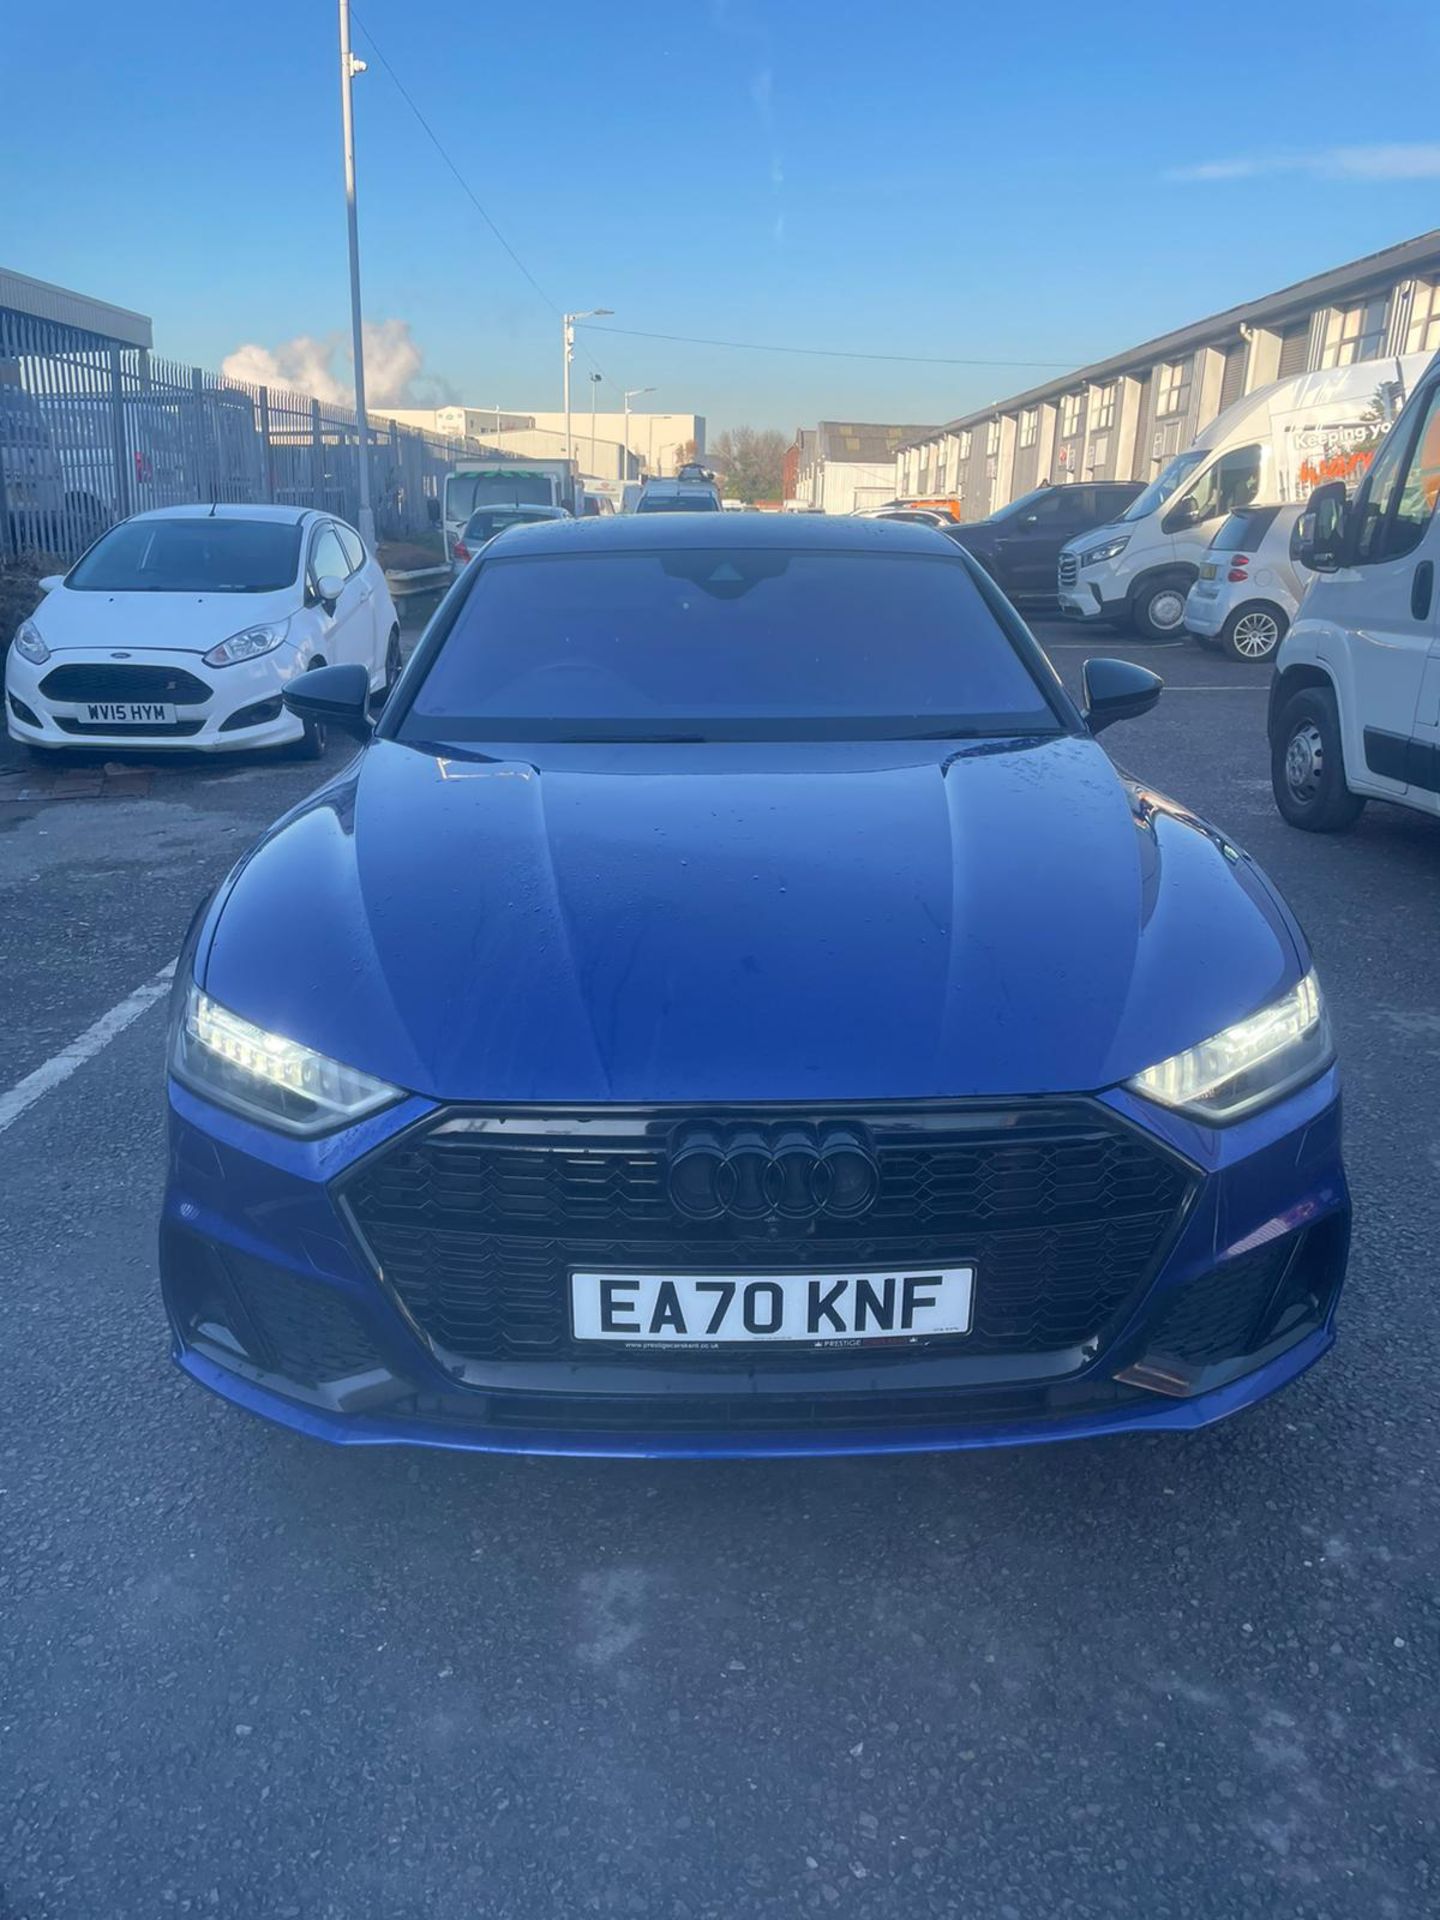 2020 AUDI A7 S-LN BLK ED45 TFSI QUAT S-A BLUE COUPE *NO VAT* - Image 3 of 10